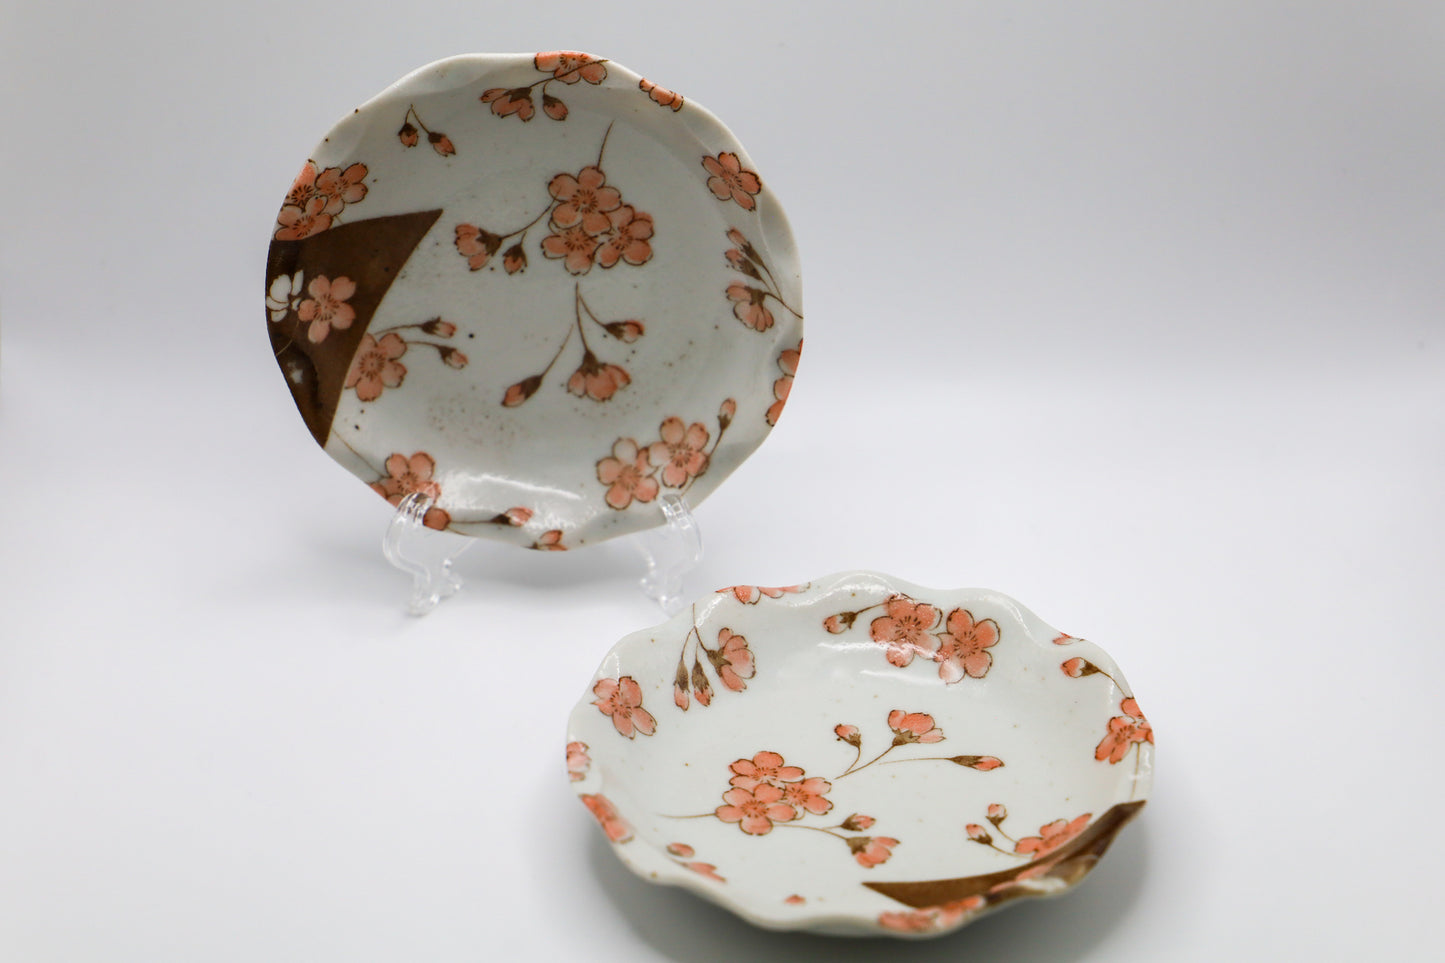 Scalloped stoneware with cherry blossoms